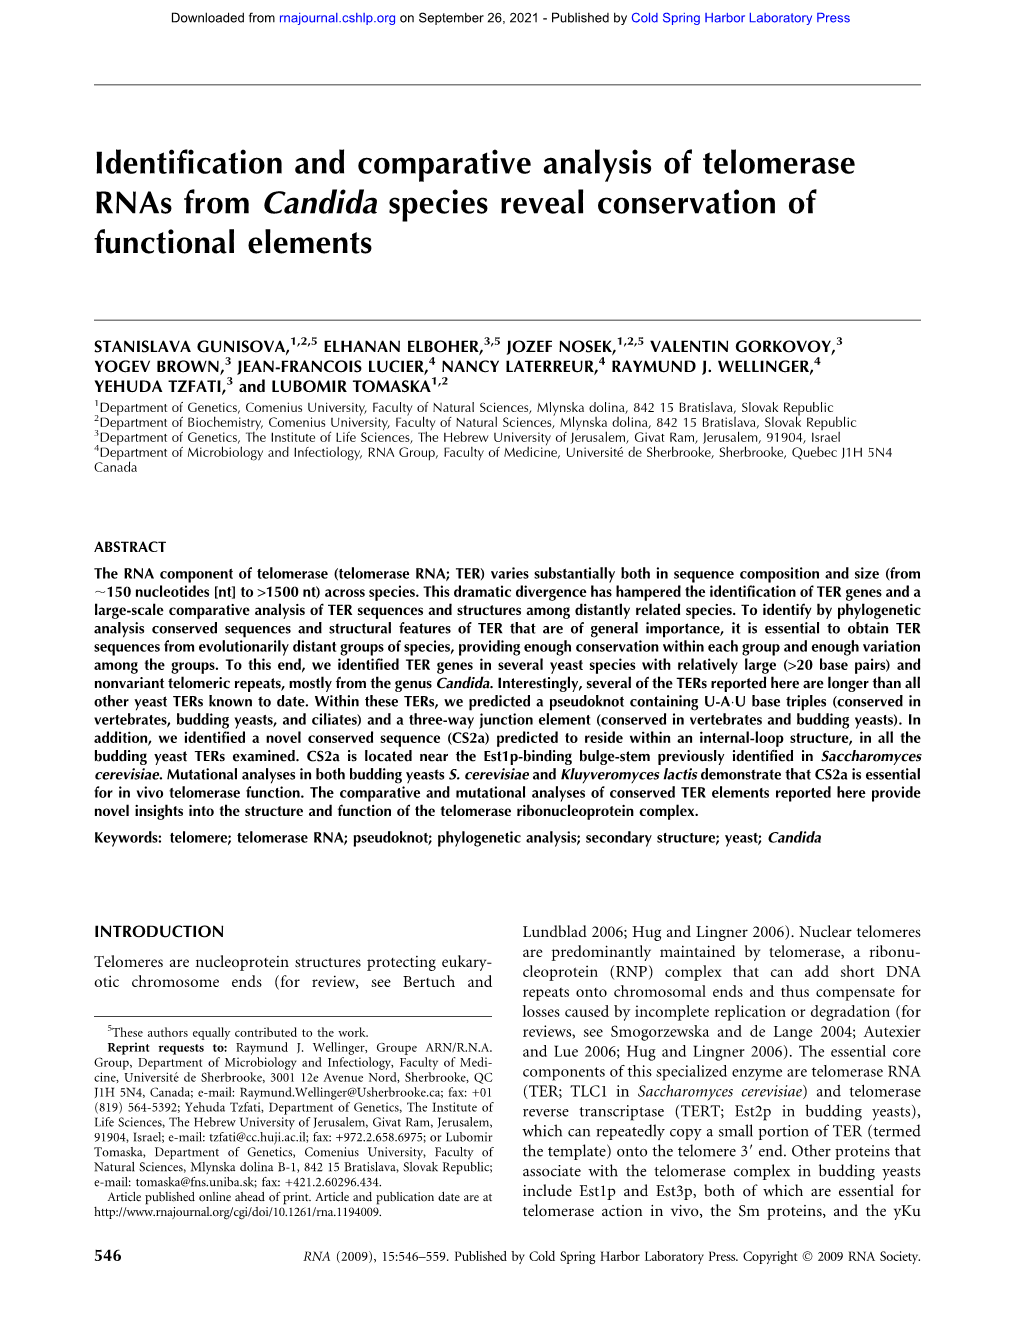 Identification and Comparative Analysis of Telomerase Rnas from Candida Species Reveal Conservation of Functional Elements